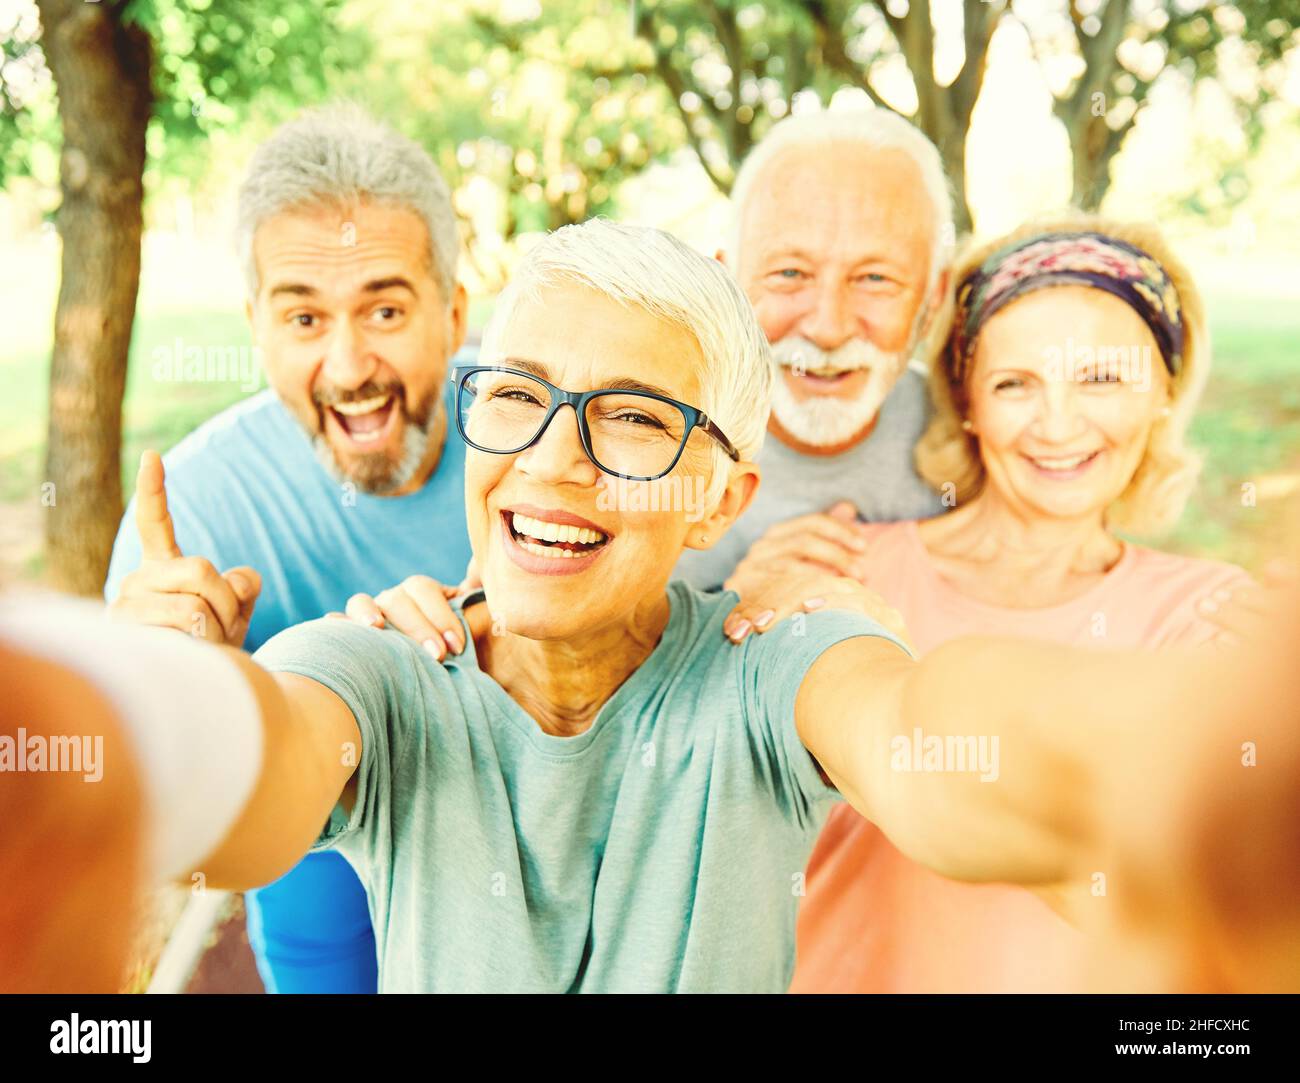 outdoor senior fitness woman man lifestyle active sport exercise healthy fit retirement selfie mobile phone Stock Photo